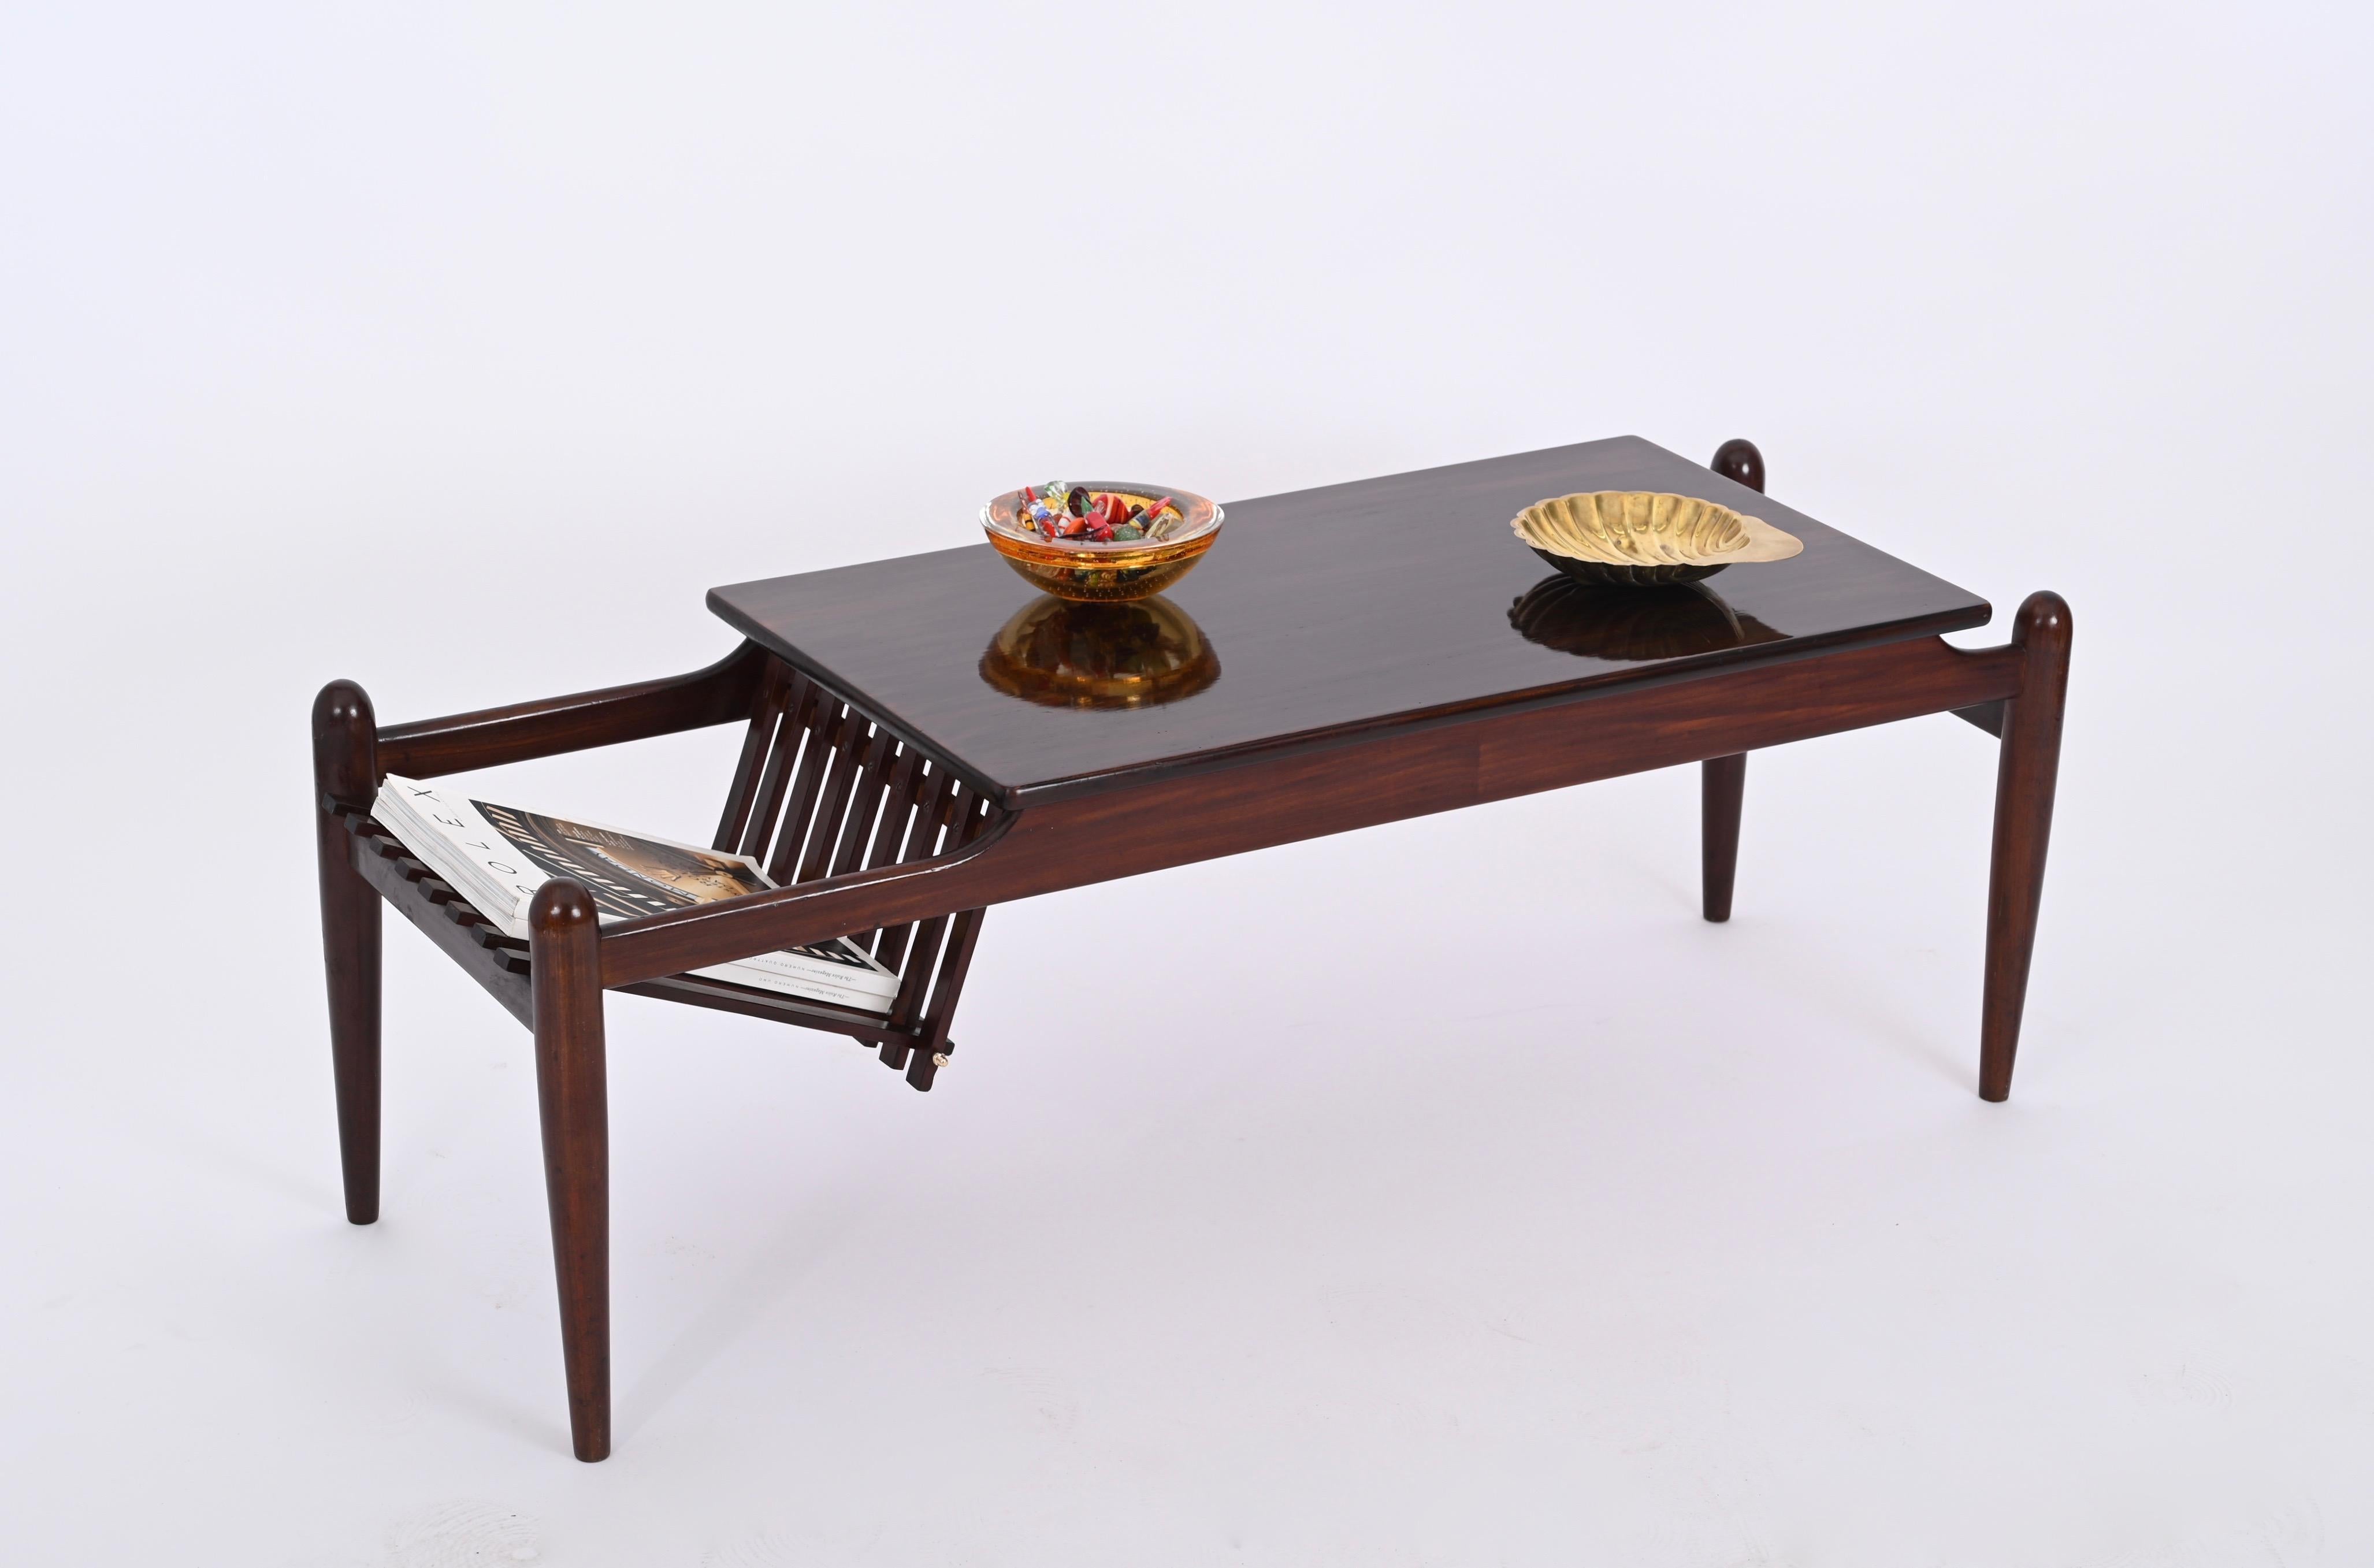 Midcentury Coffee Table with Magazine Rack in Teak Wood, Italy 1960s For Sale 10